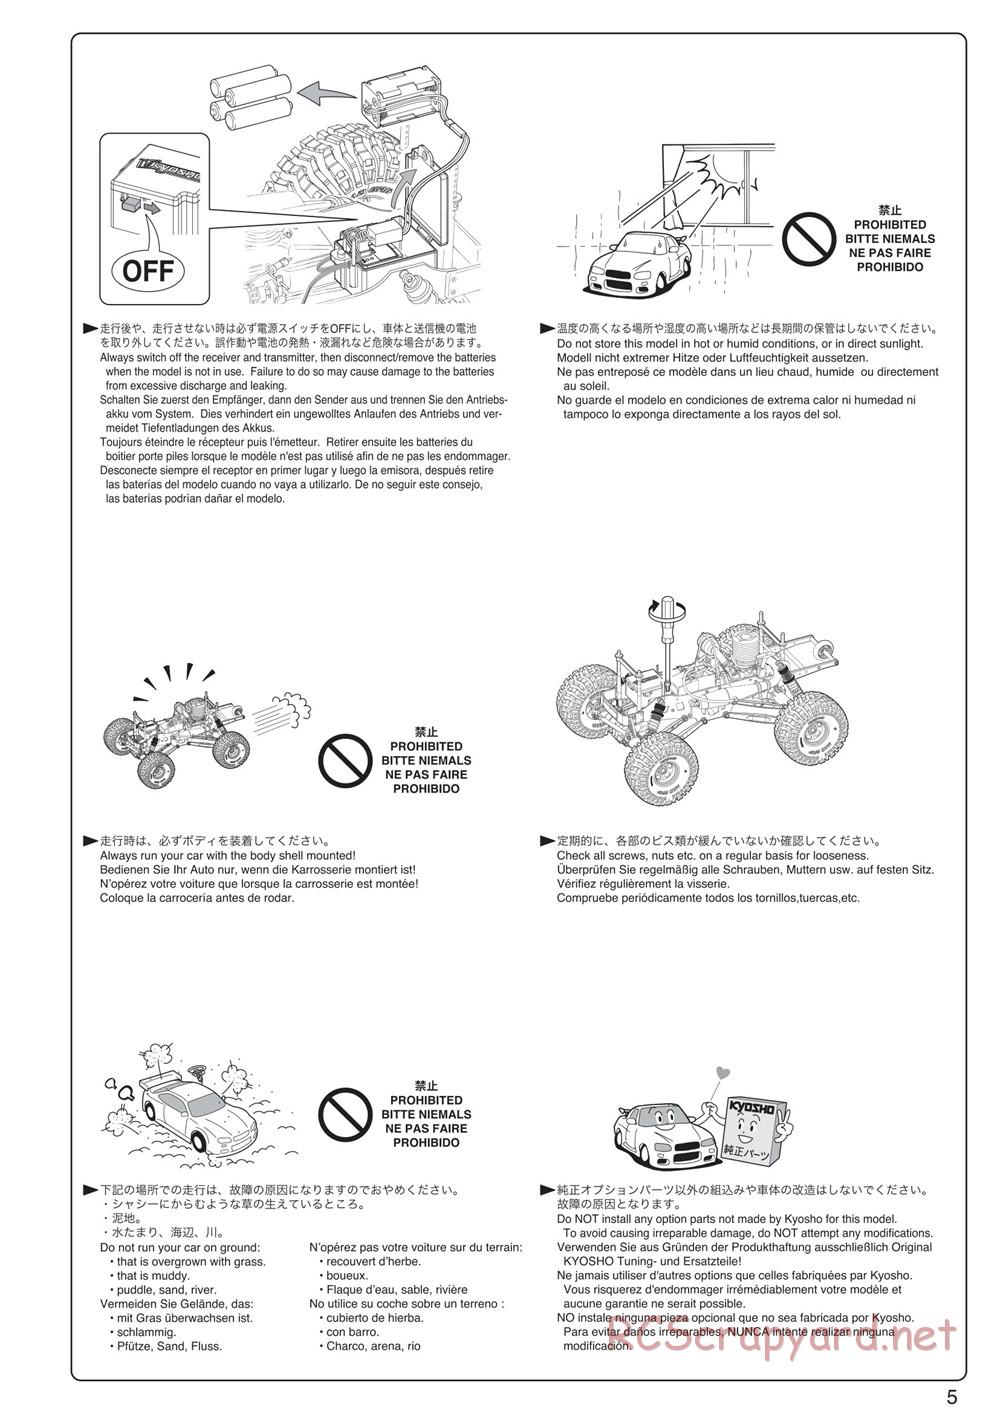 Kyosho - Mad Crusher - Manual - Page 5